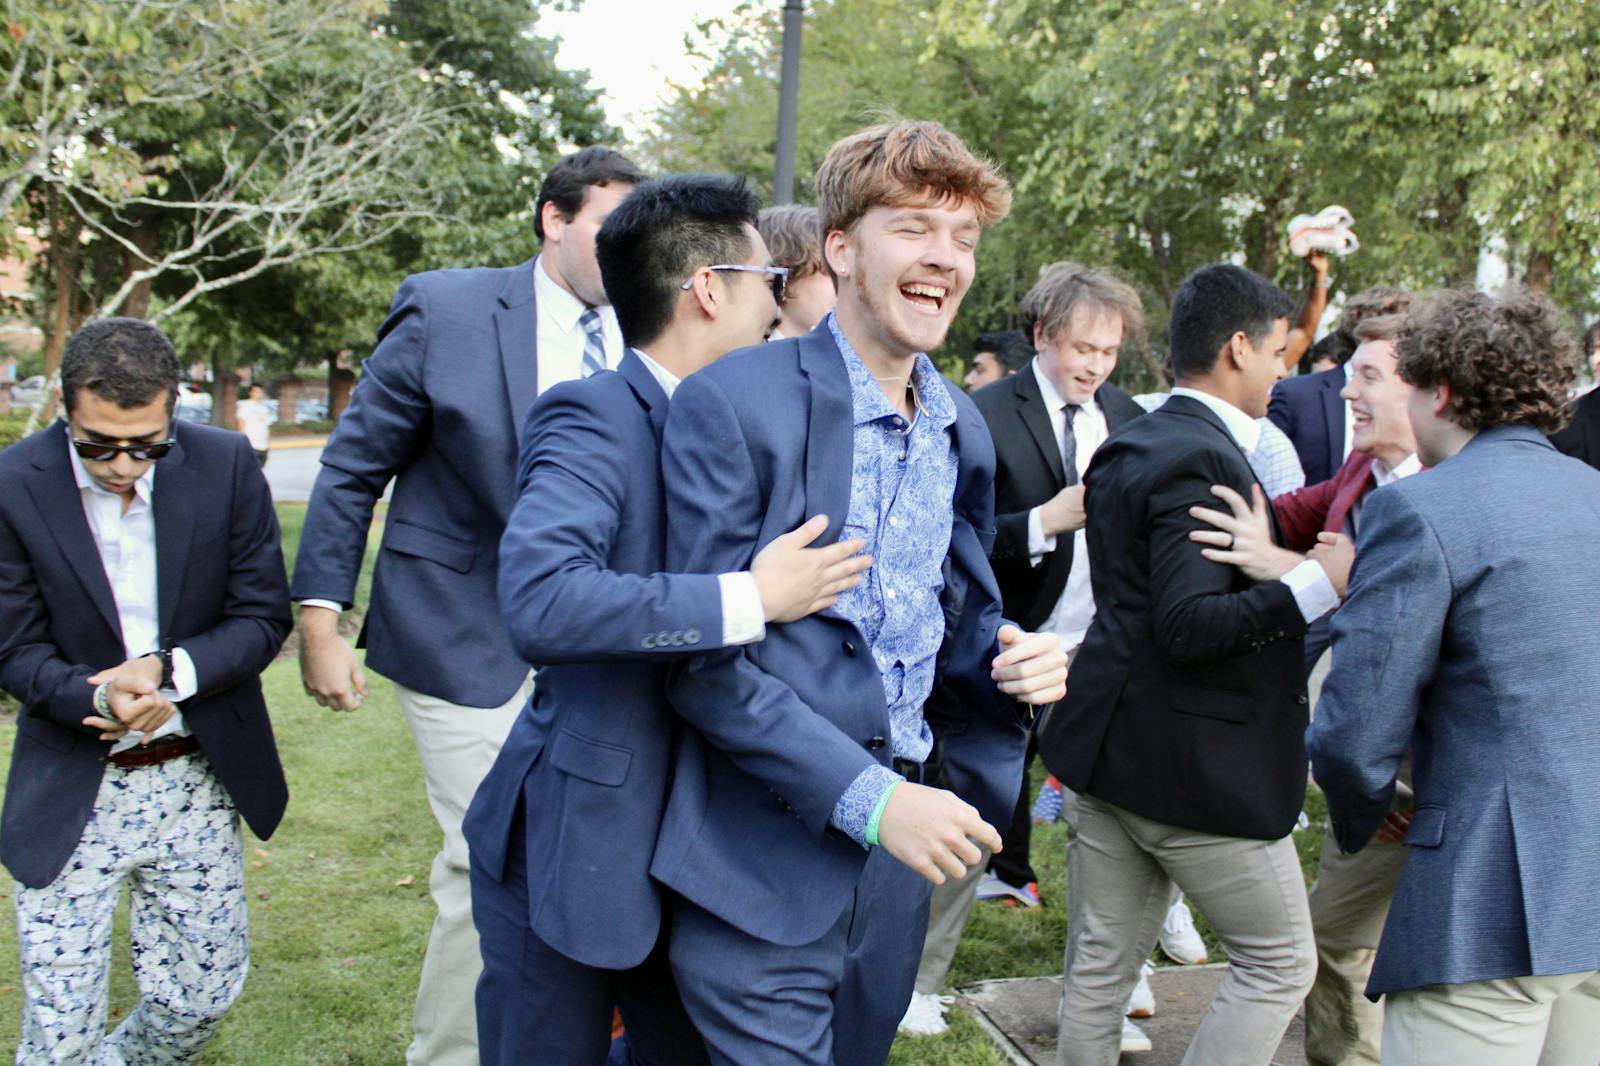 IFC recruitment concludes with boisterous bid day